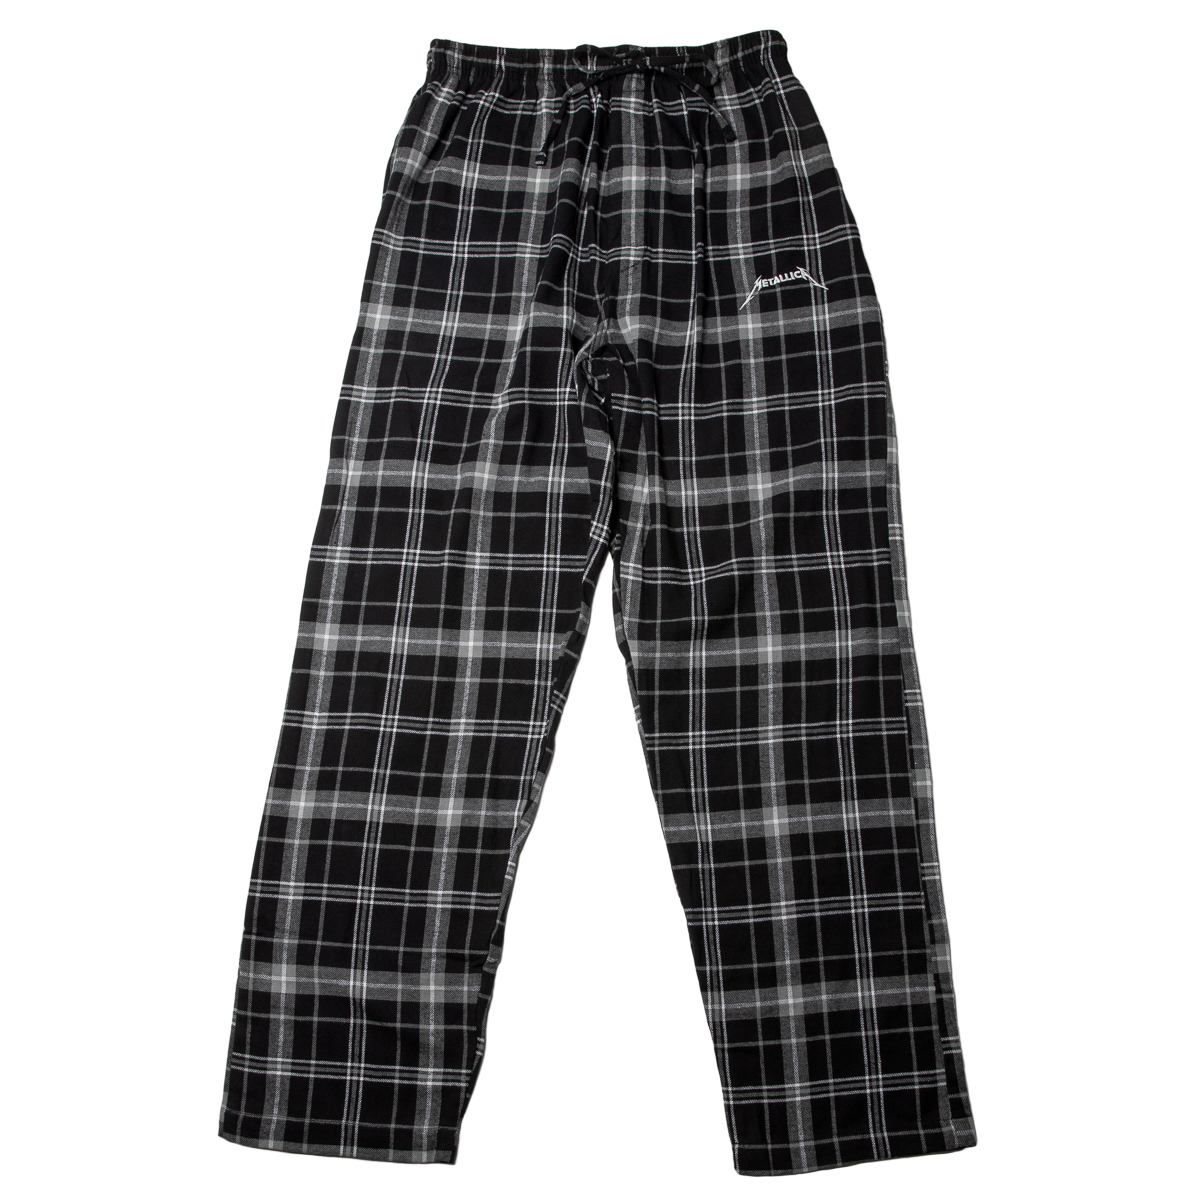 Fruit Of The Loom Men's And Big Men's Microsanded Woven Plaid Pajama ...